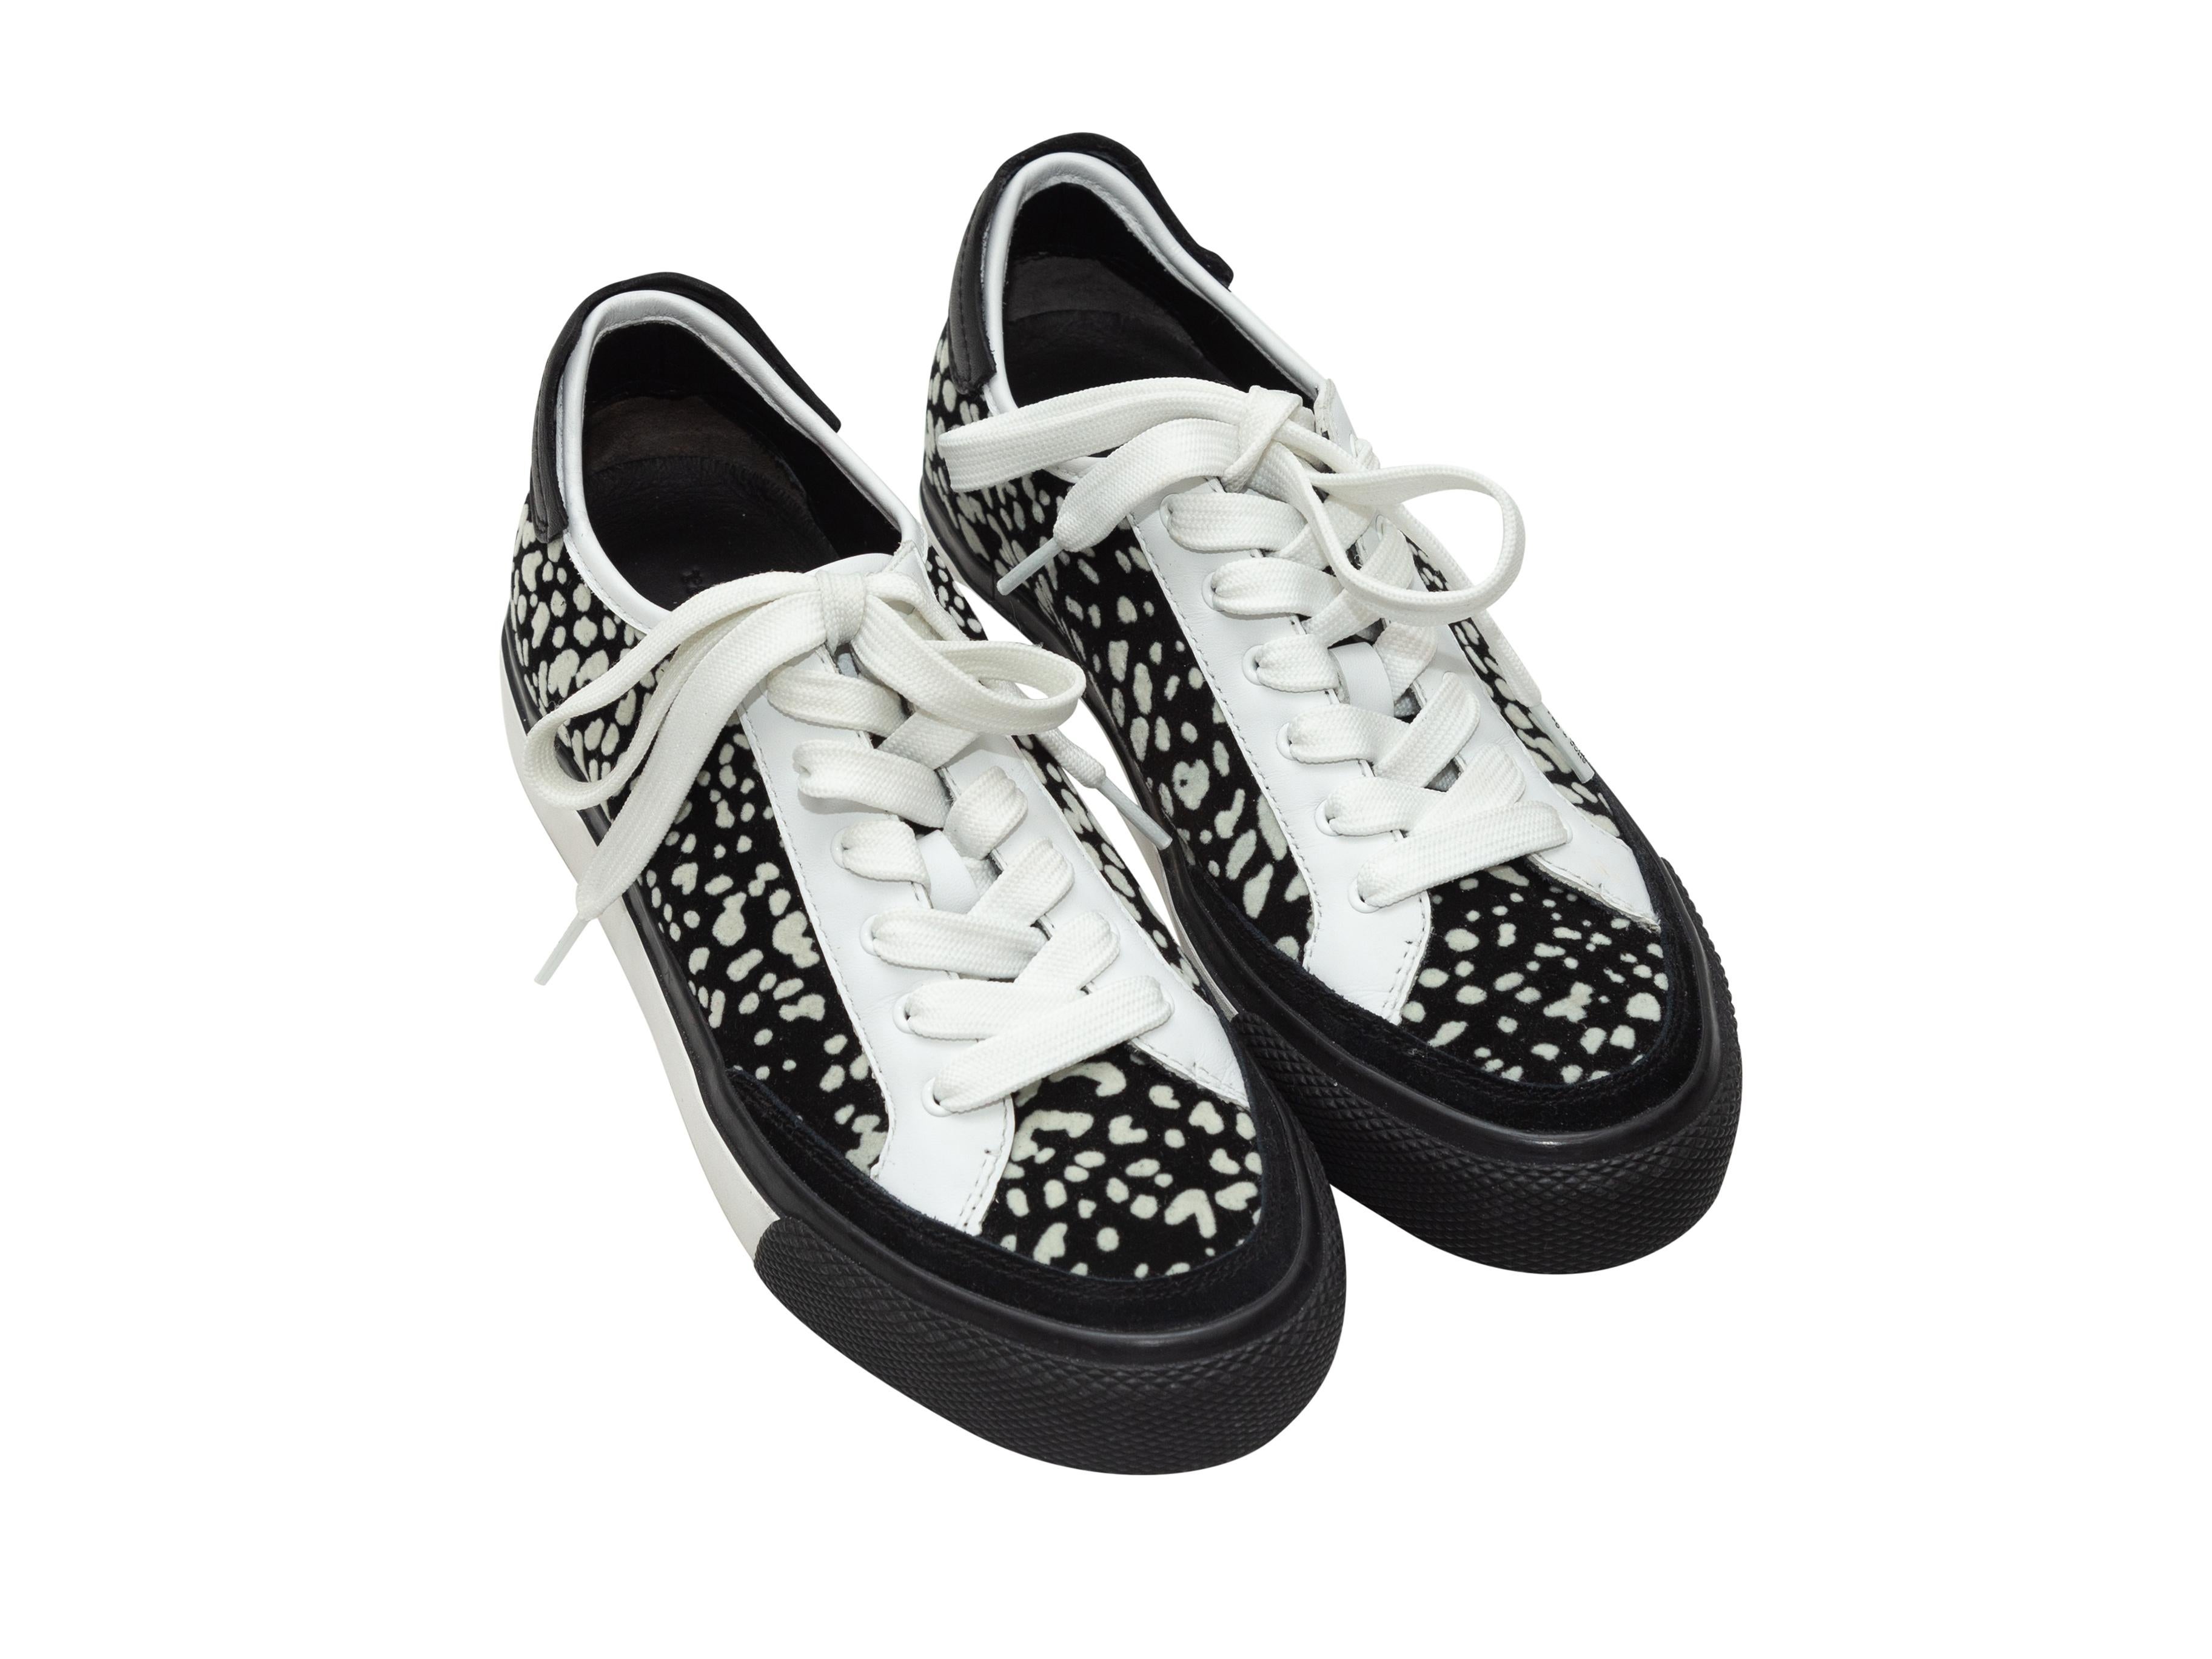 Product details: Black and white low-top sneakers by Rag & Bone. Dotted print throughout. Rubber soles. Lace-up tie closures at top. 1